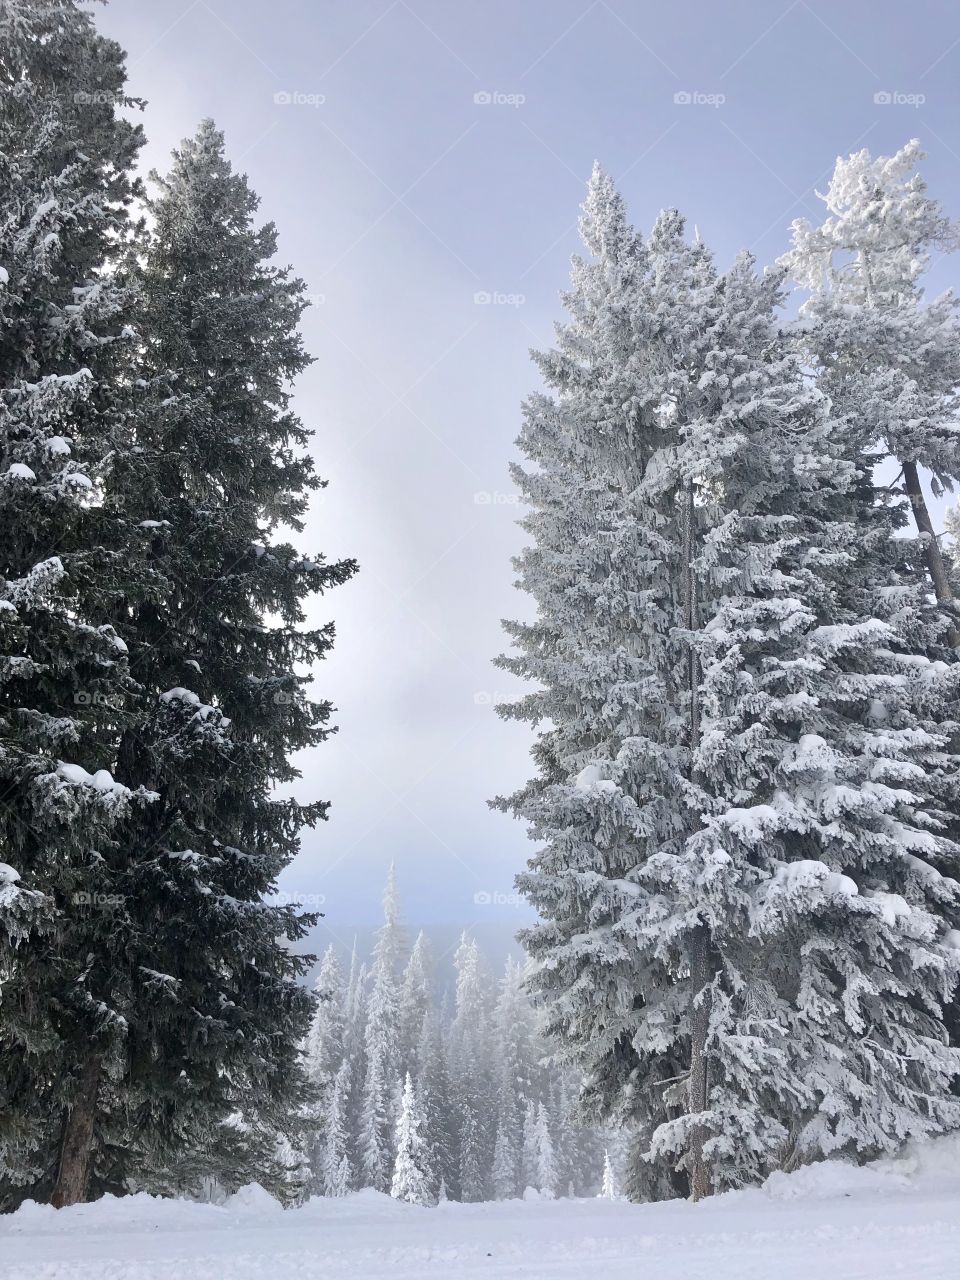 Winter wonderland high up in the mountains. 